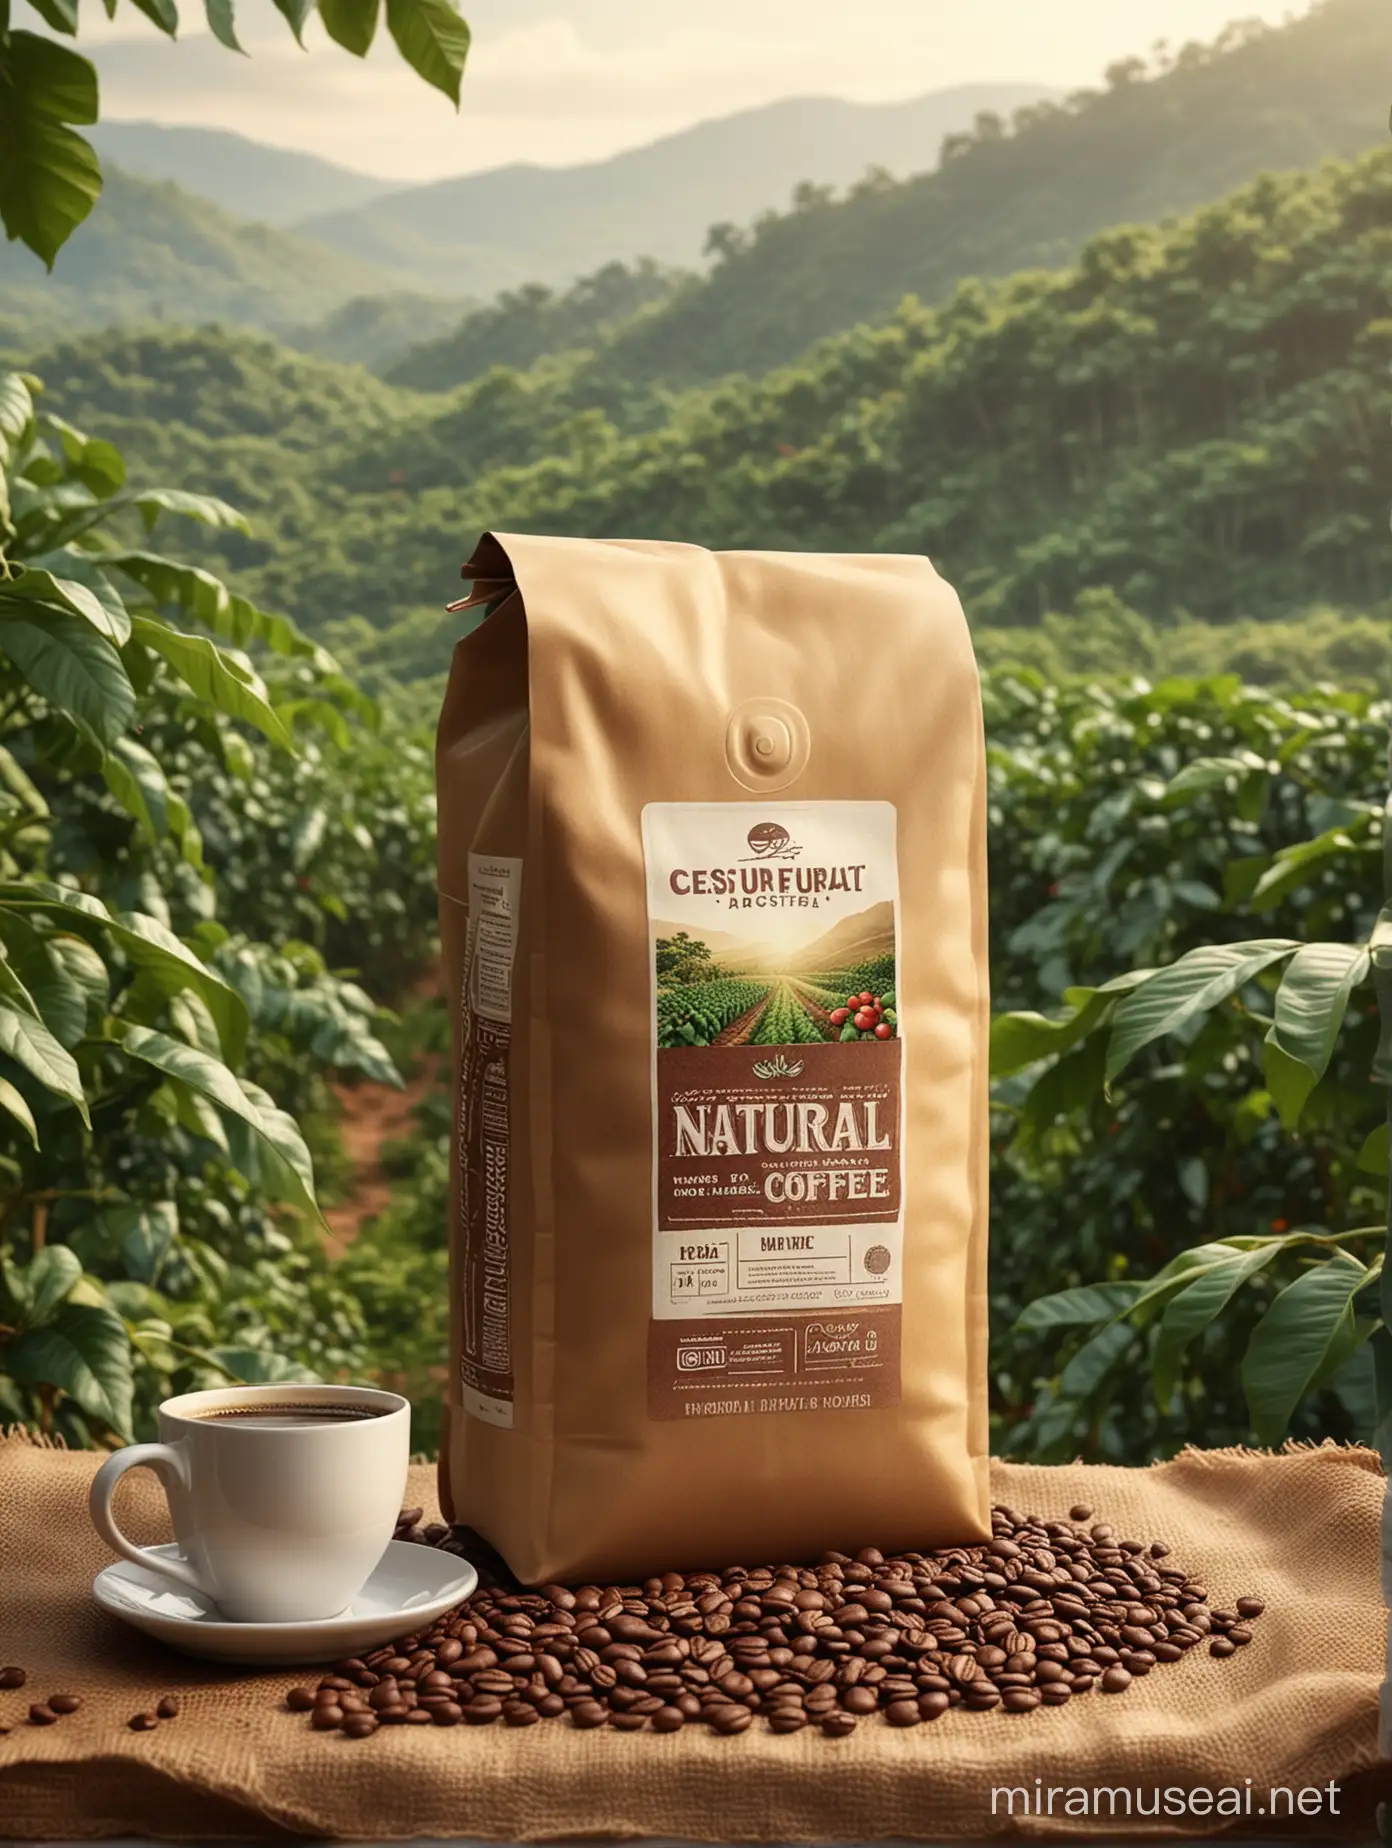 Inviting Natural Coffee CloseUp Packaging amidst Coffee Plantations